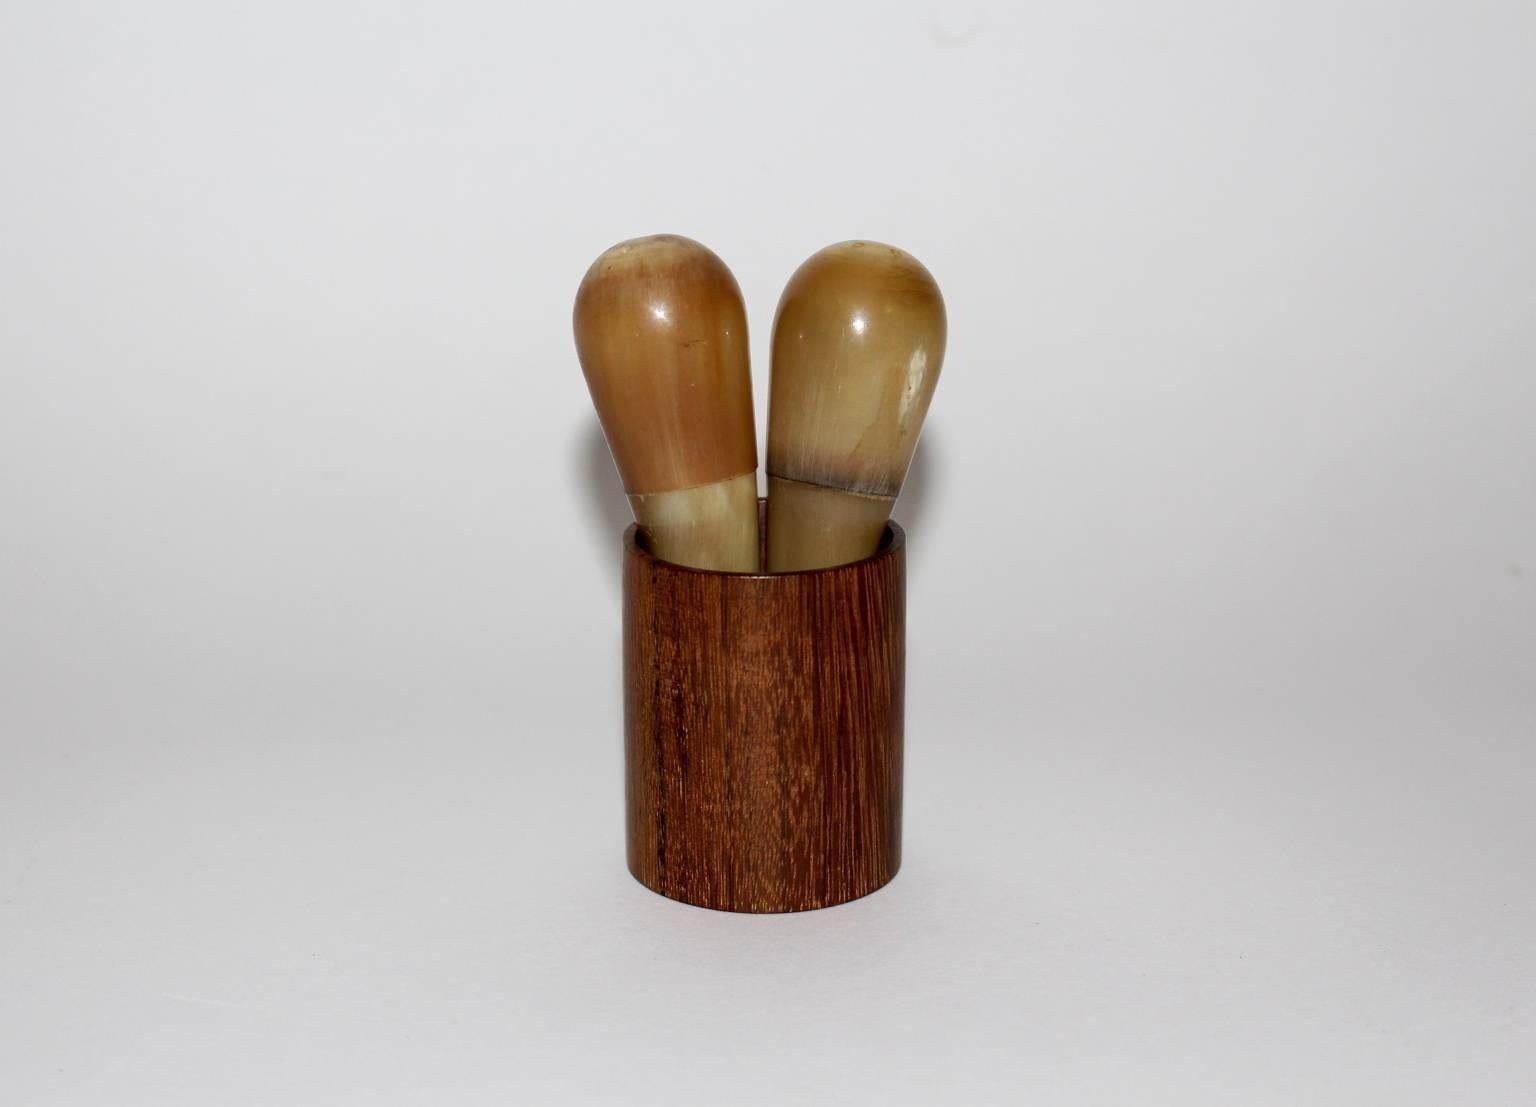 This presented salt and pepper shakers in a wooden cup shows a great design by Carl Auböck, Vienna 1950s.
Two shakers made of horn, which are a pleasure to hold, and a wooden cup features this delicate tableware.
The vintage condition is very